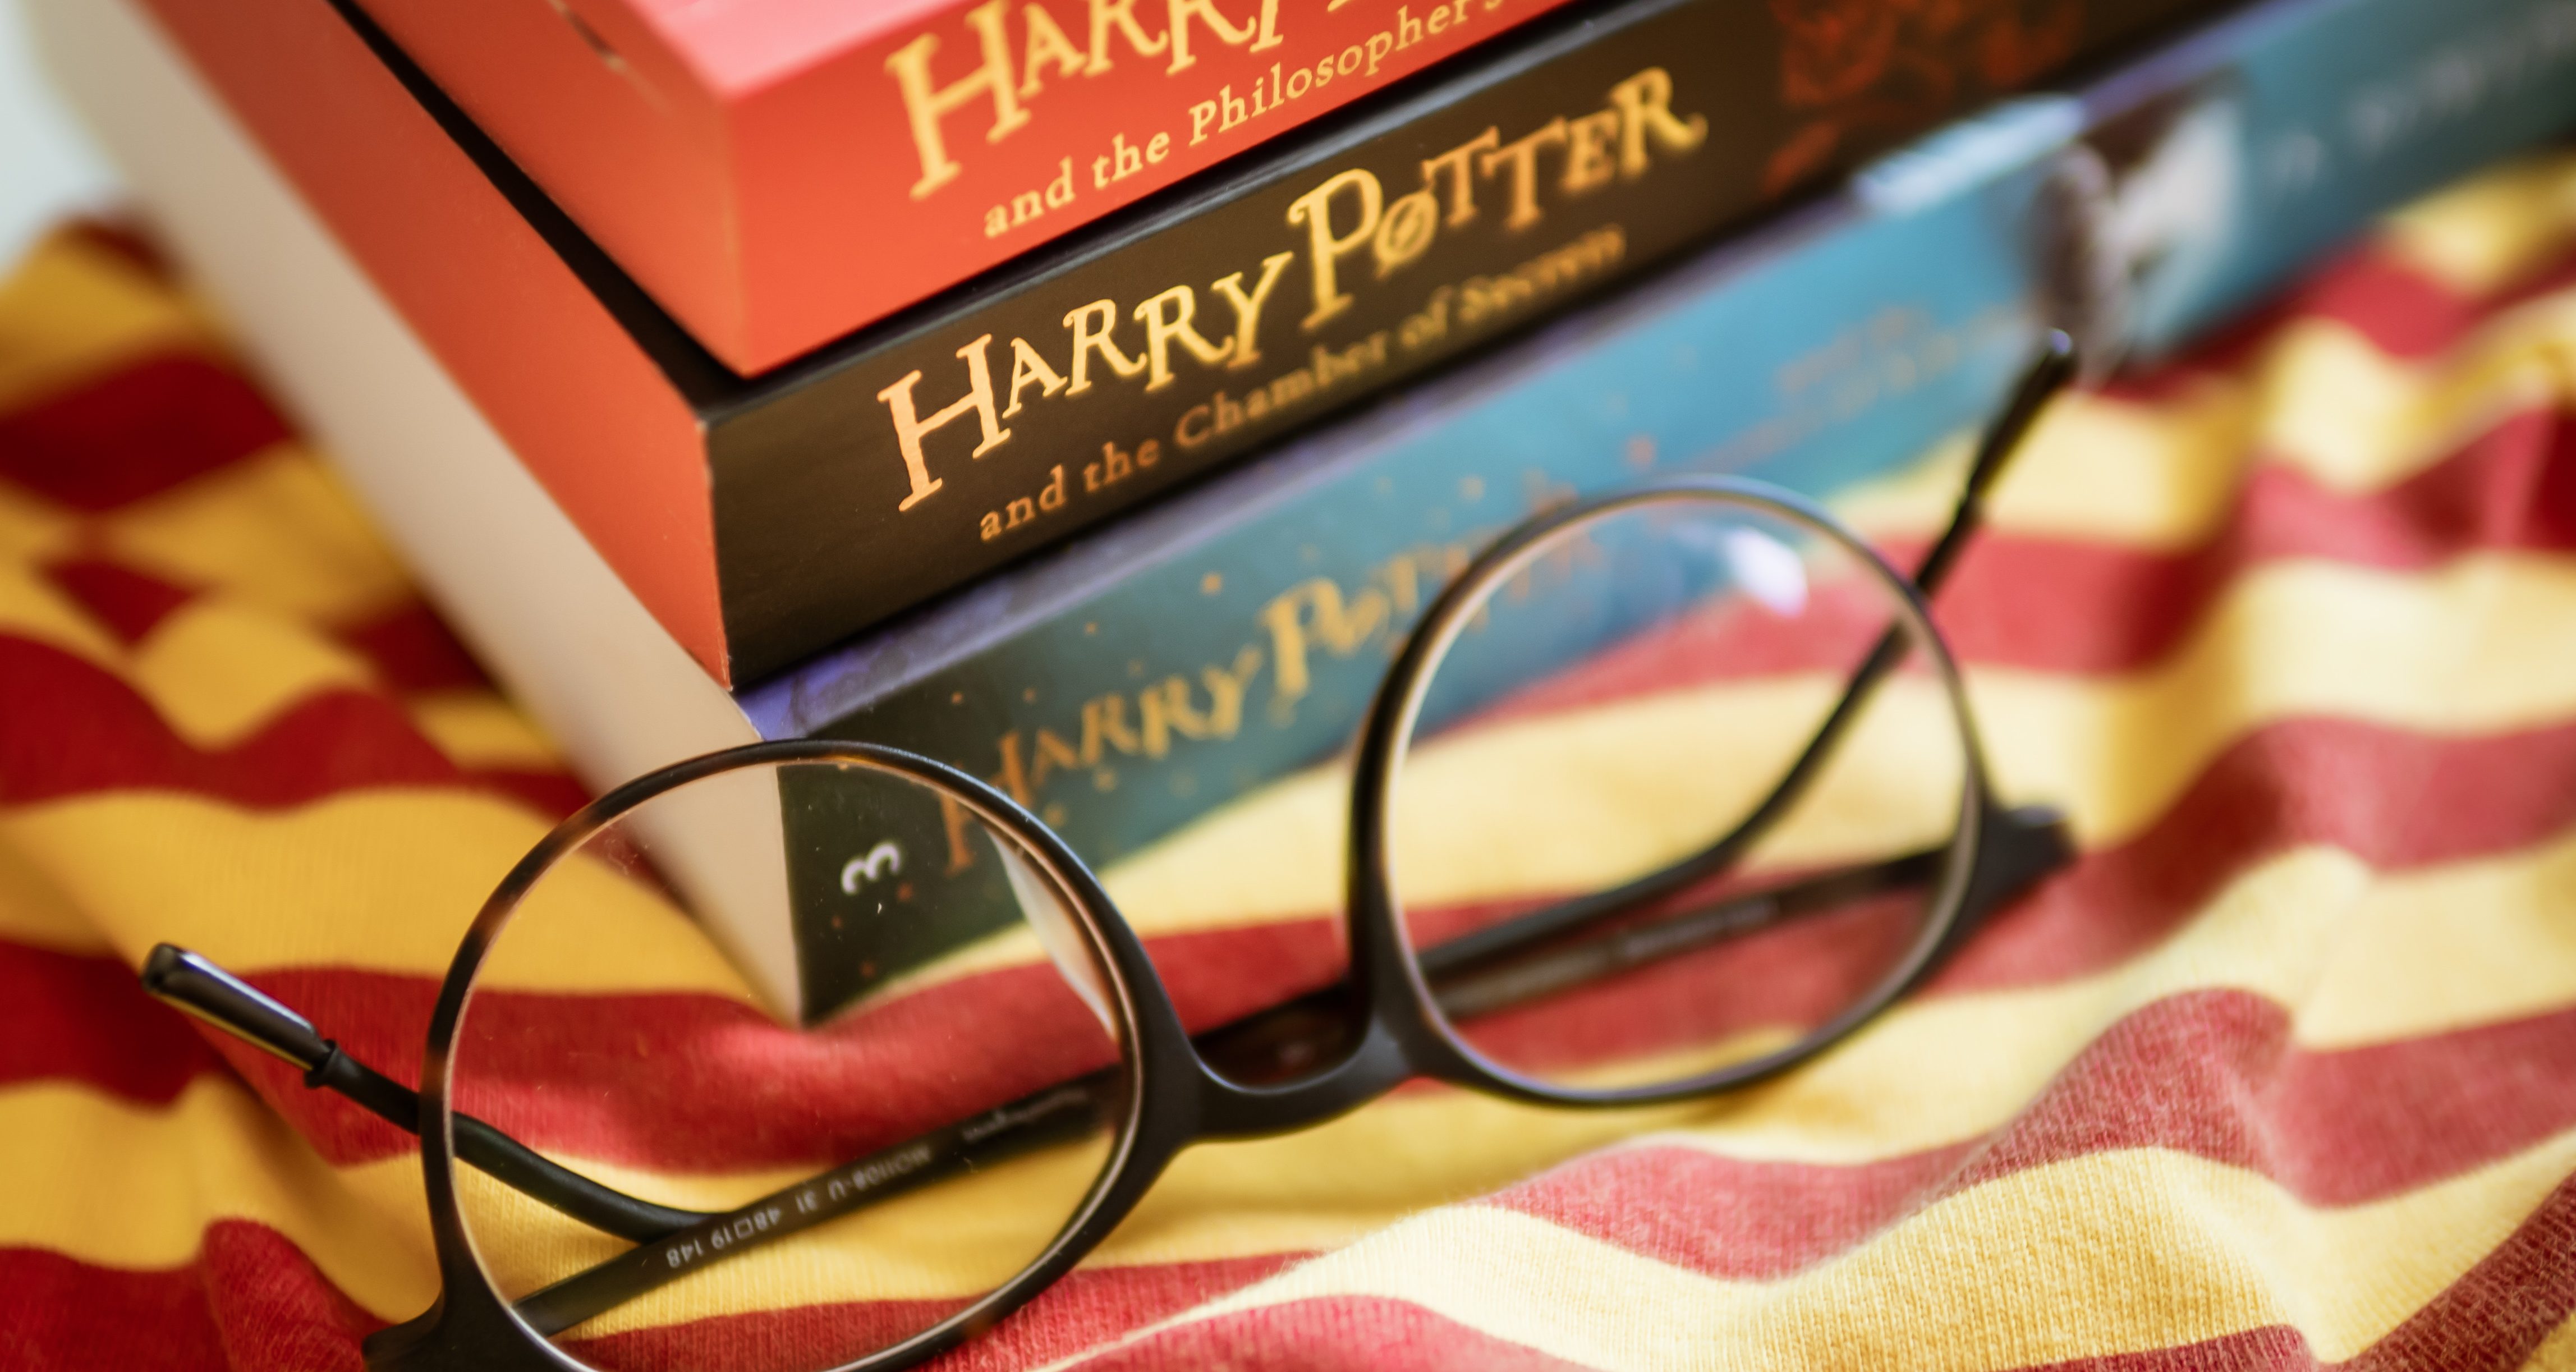 Harry Potter books and glasses